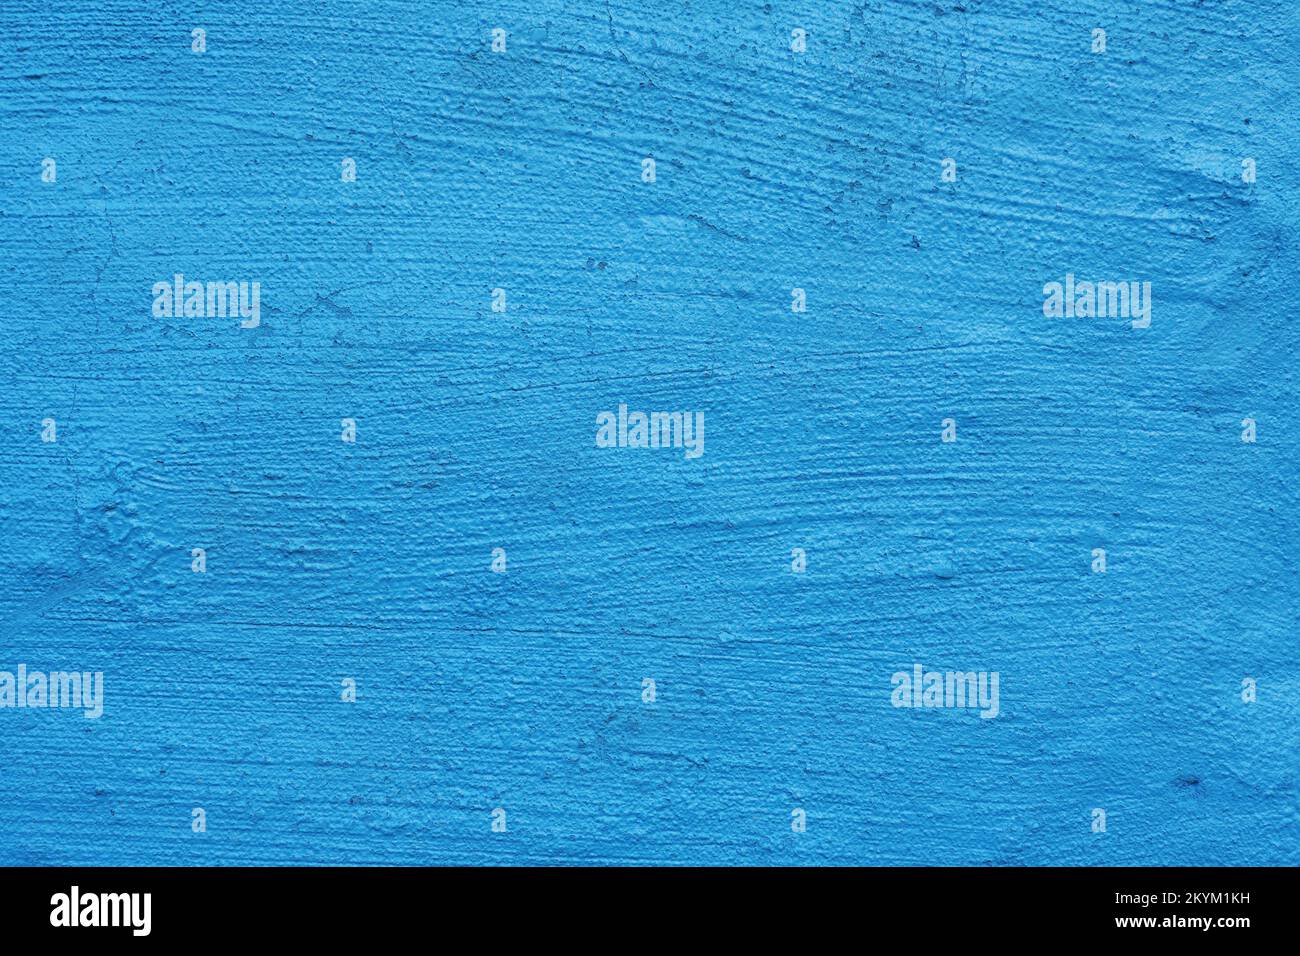 rough texture wall background painted blue Stock Photo